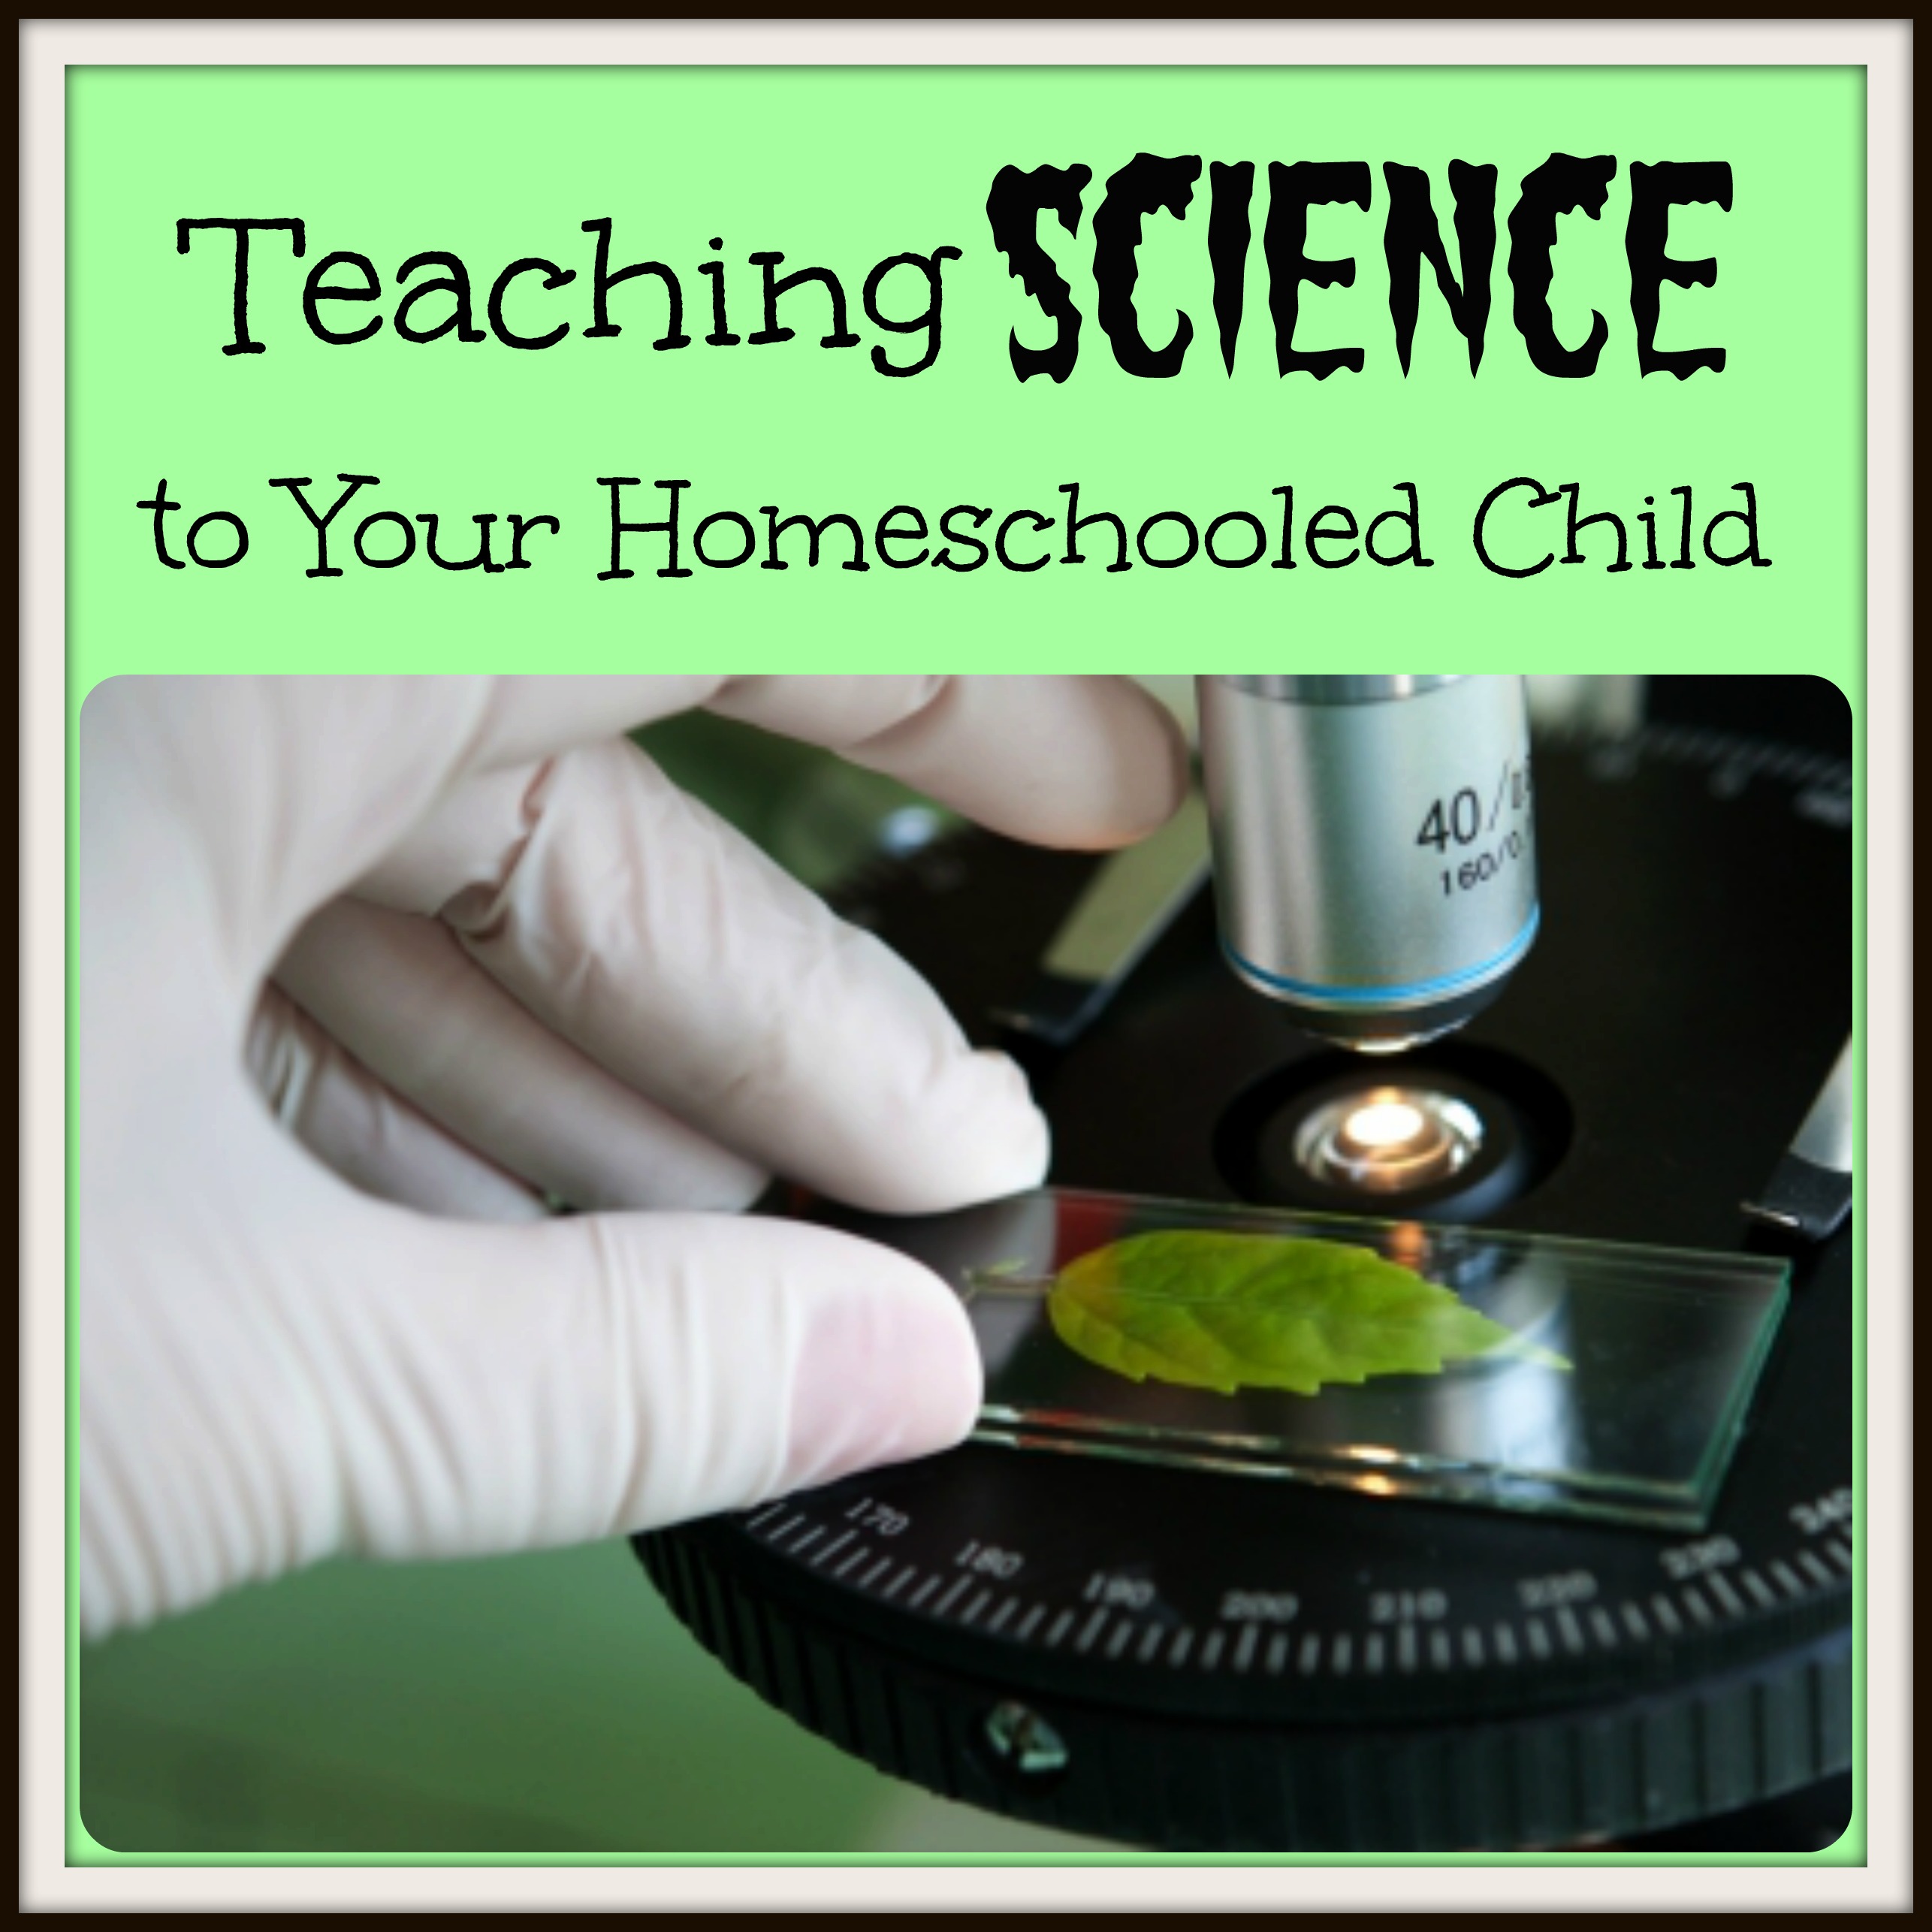 Teaching Science to Your Homeschooled Child